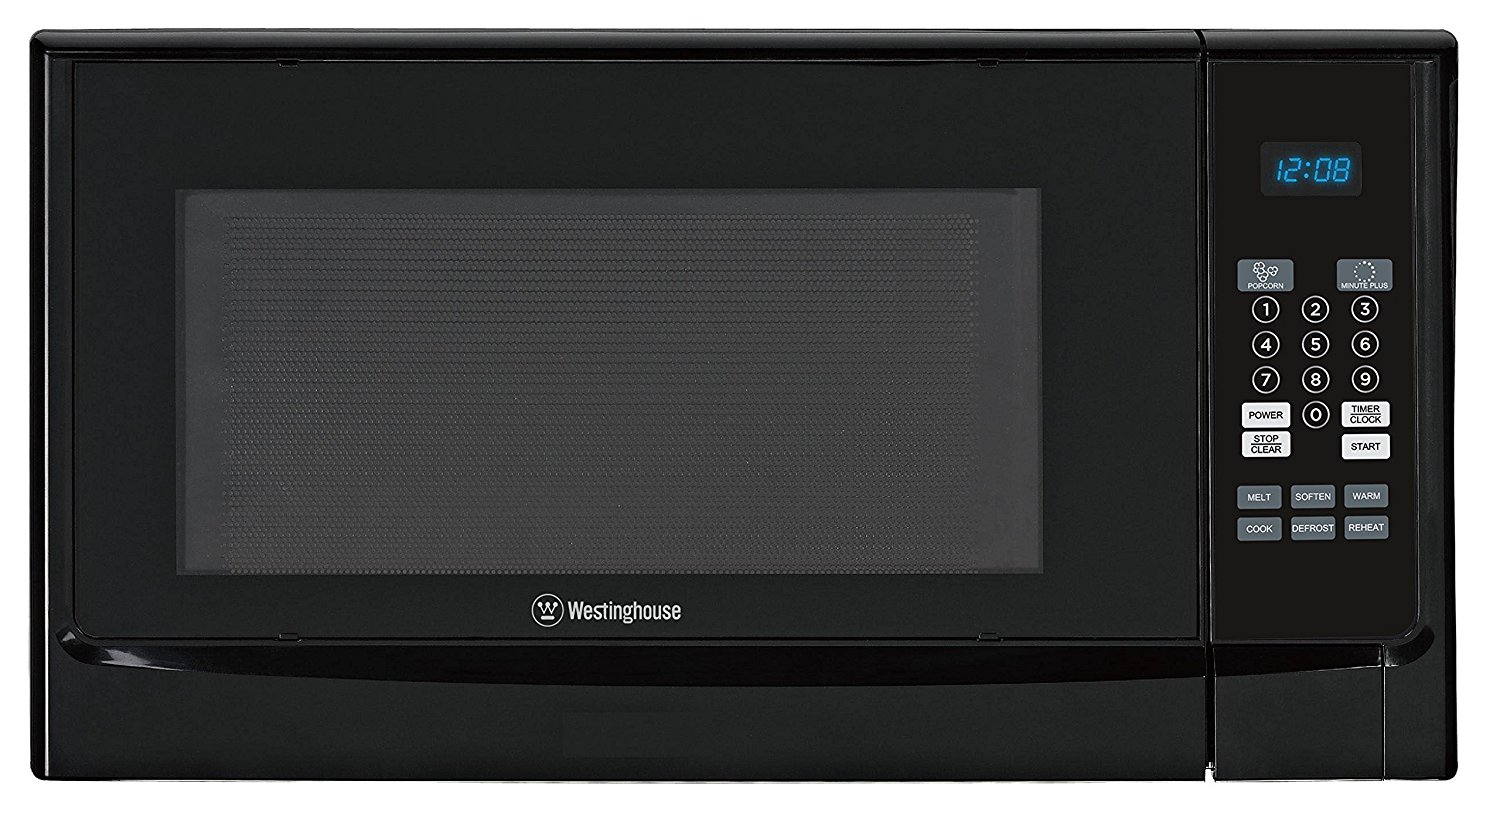 Westinghouse WCM14110B 1100 Watt Counter Top Microwave Oven, 1.4 Cubic Feet, Black Cabinet